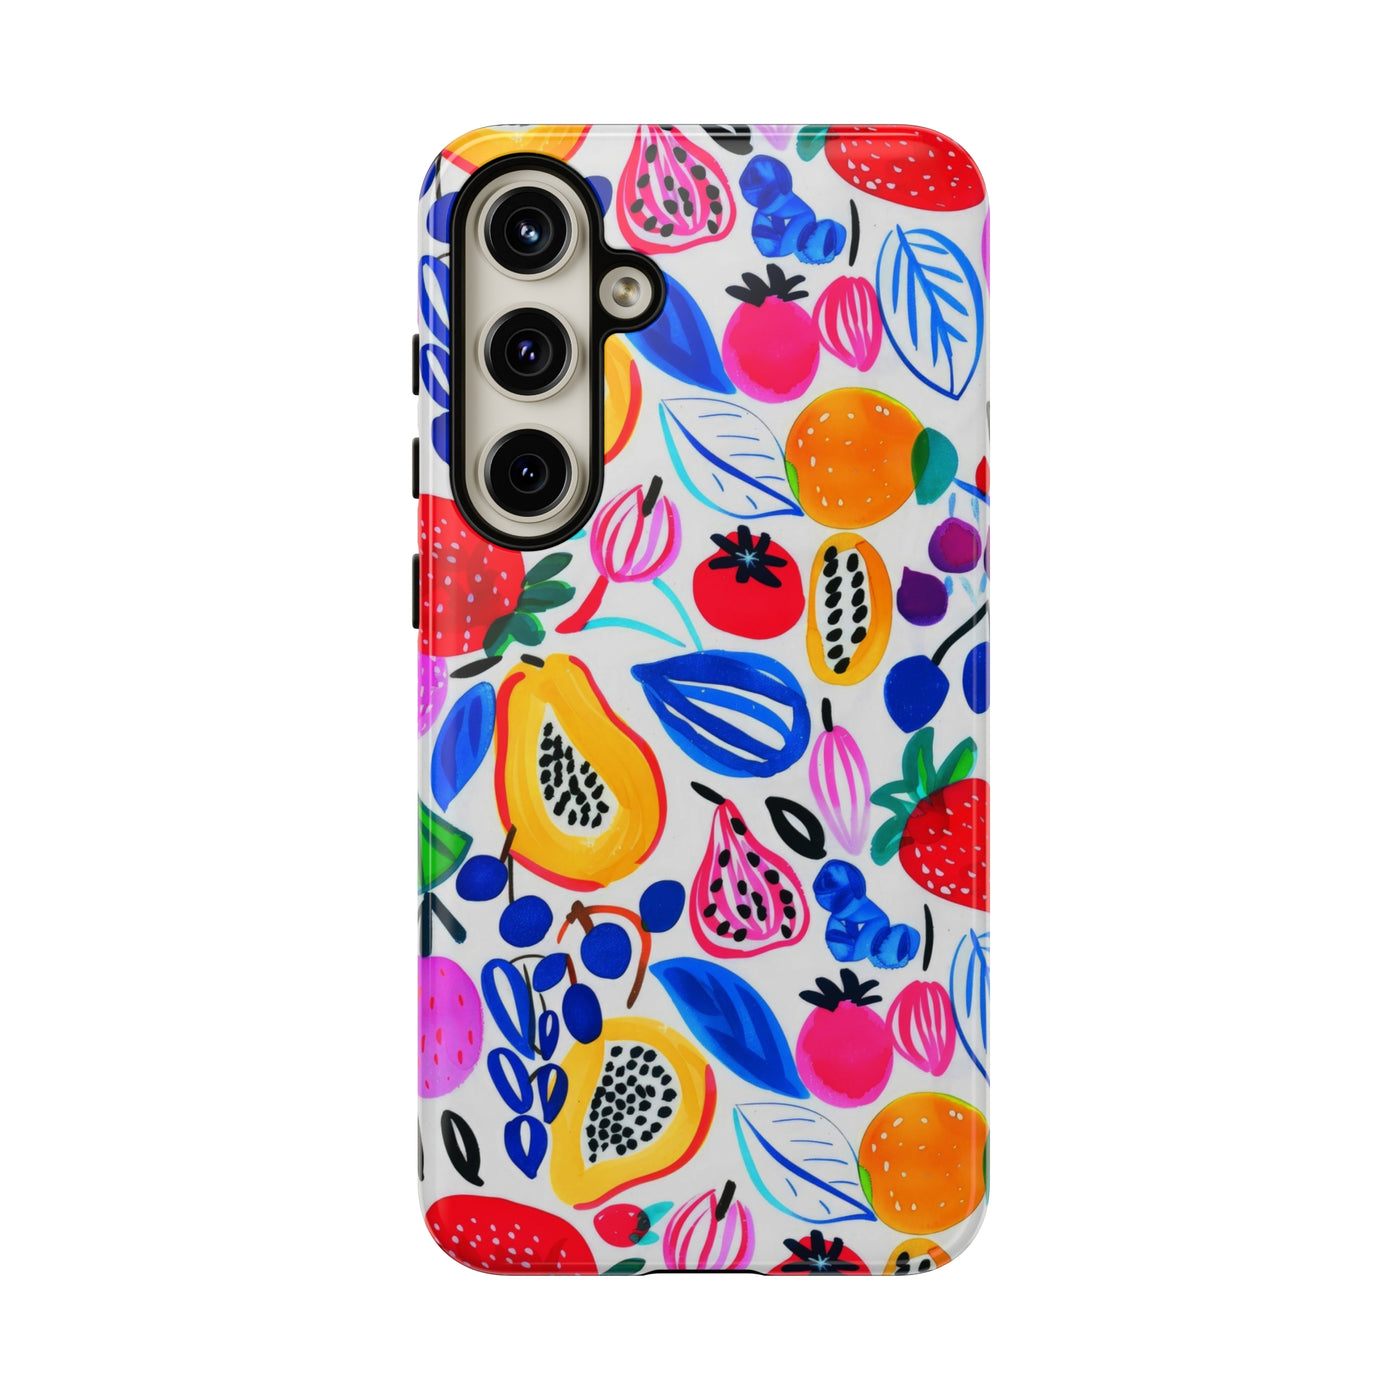 Cute Samsung Phone Case | Aesthetic Samsung Phone Case | Galaxy S23, S22, S21, S20 | Summer Fruit Cocktail, Protective Phone Case